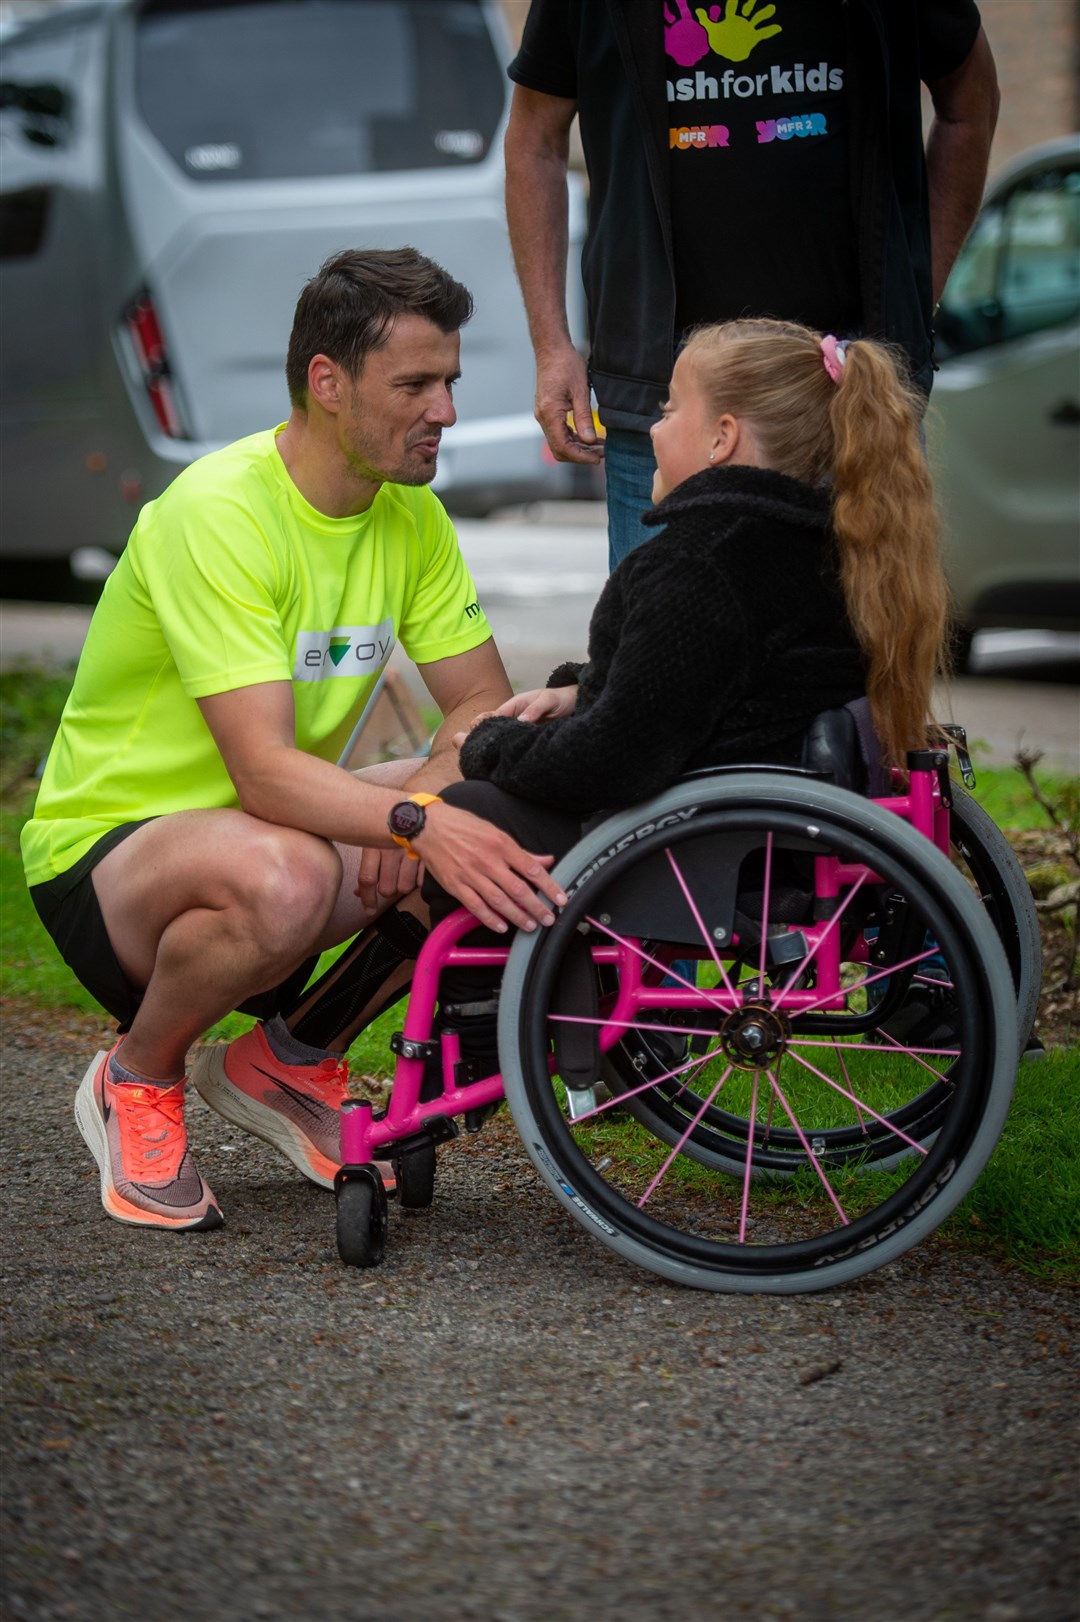 Pebbles Sawyer who joined Steven Mackay on one of the sections was at the finish line to congratulate him. Picture: Callum Mackay